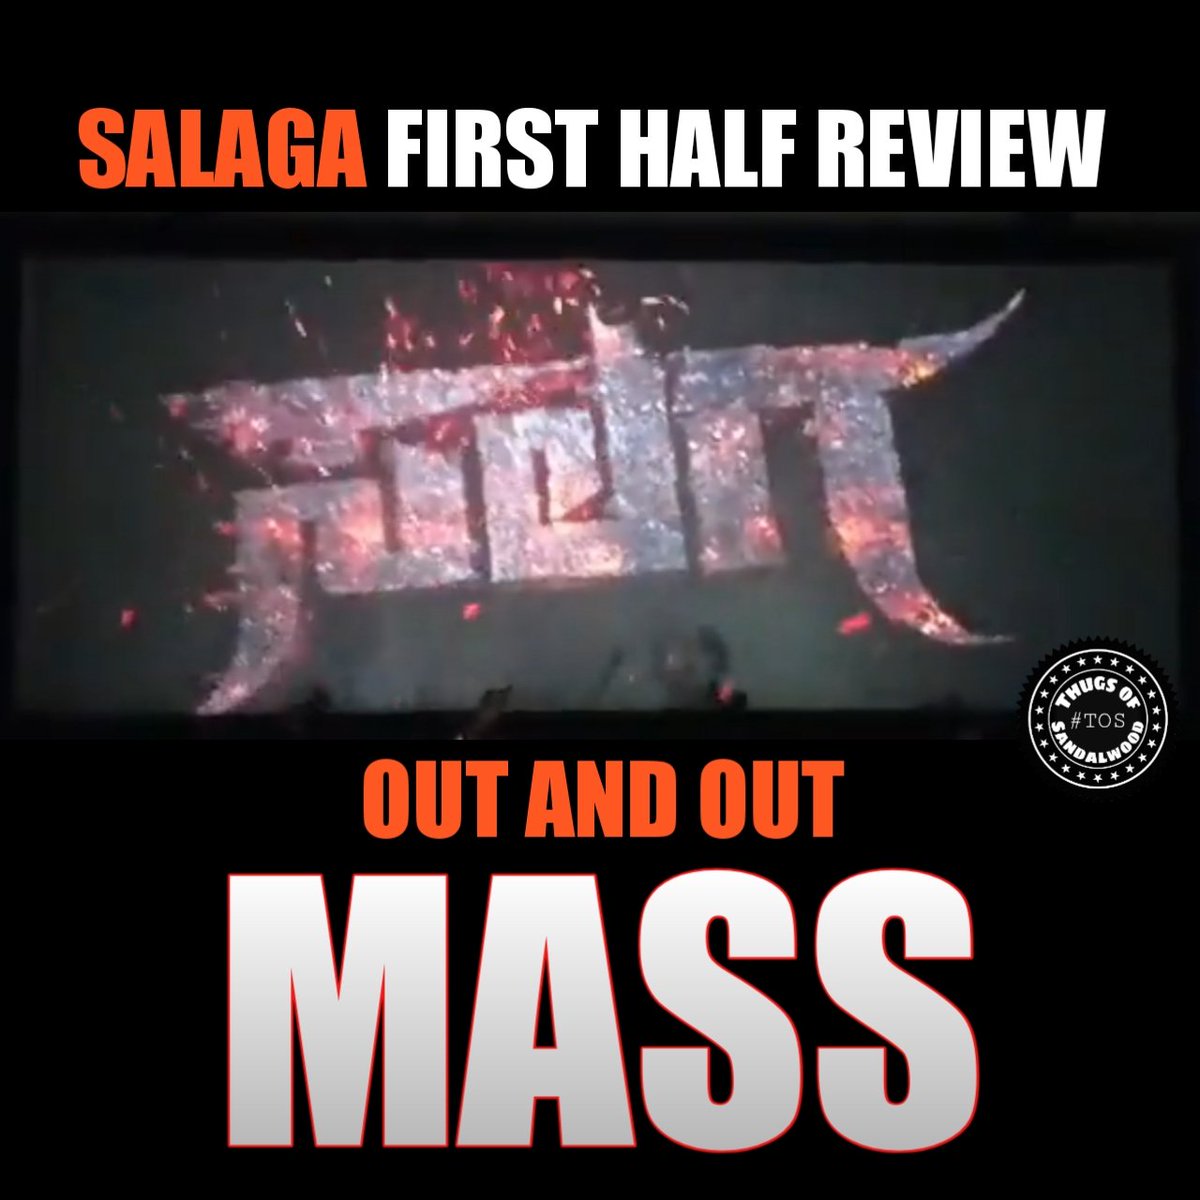 Bit dragged but not at all boring, screenplay running like horse🐎 #DuniaVijay gained distinction in his first try itself in the field of DIRECTION🤘
Waiting for #DaalivsVijay in second half
#Salaga #DuniaVijay #DaaliDananjay @OfficialViji @kp_sreekanth @Dhananjay